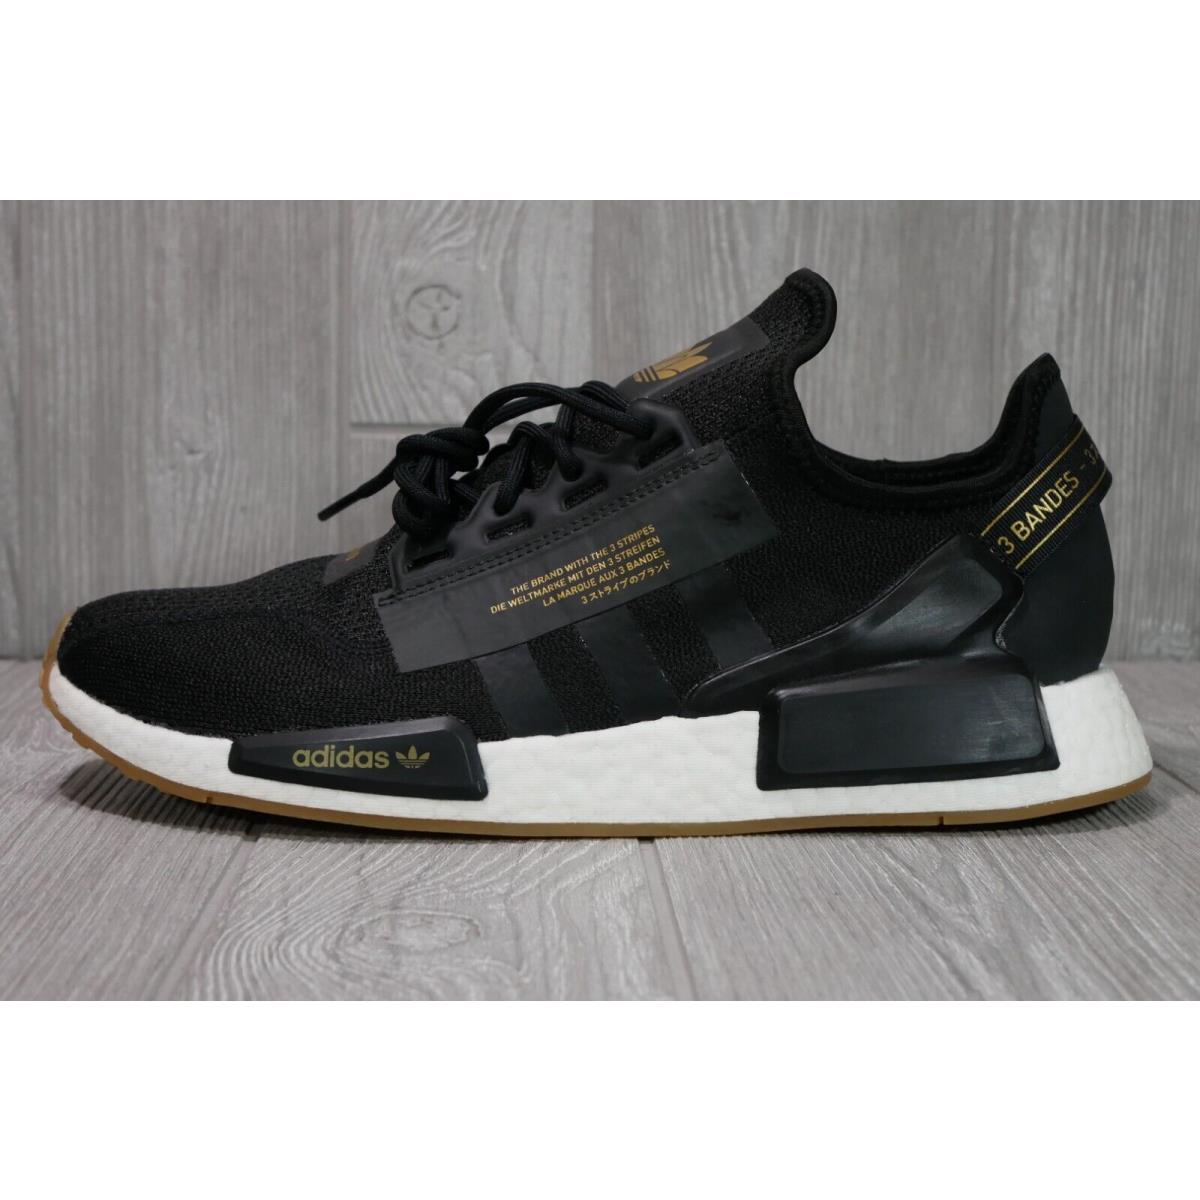 Adidas Nmd R1 V2 Boost Black Gold Shoes Men`s Size 12 FZ2132